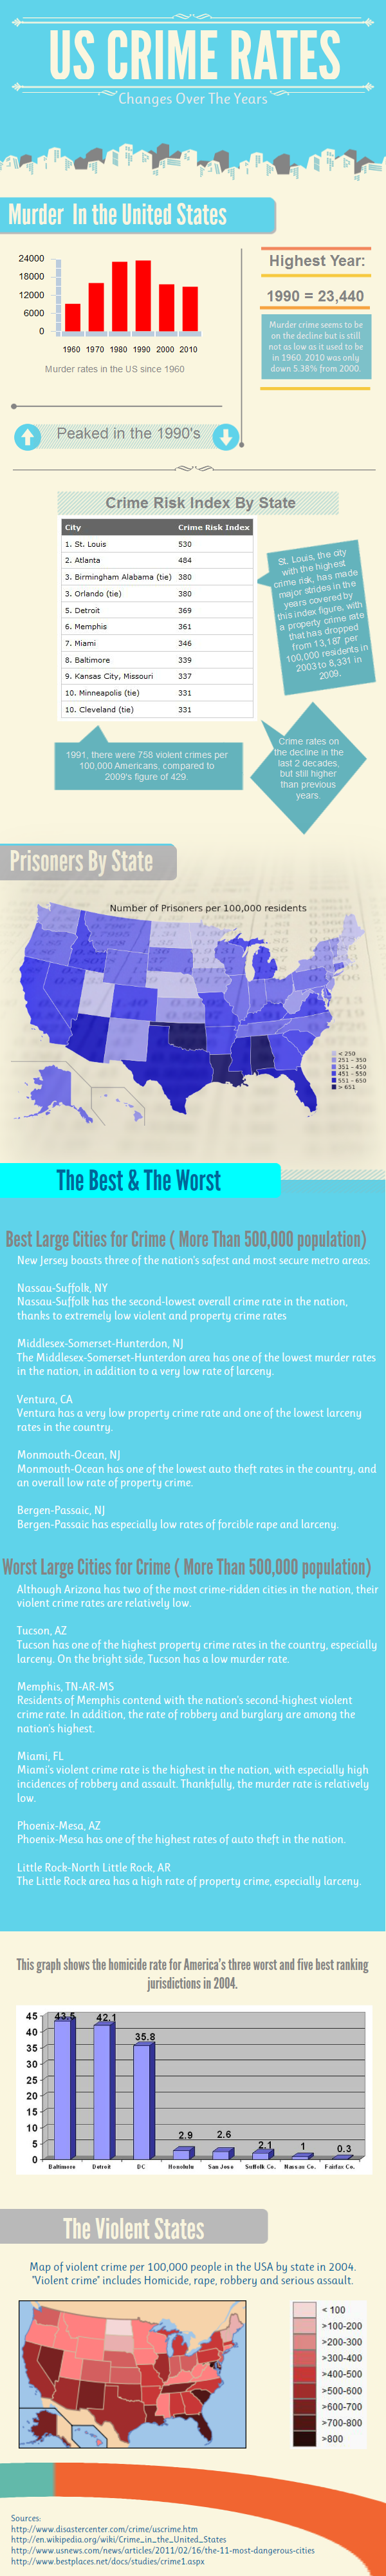 Crime Rates in the USA